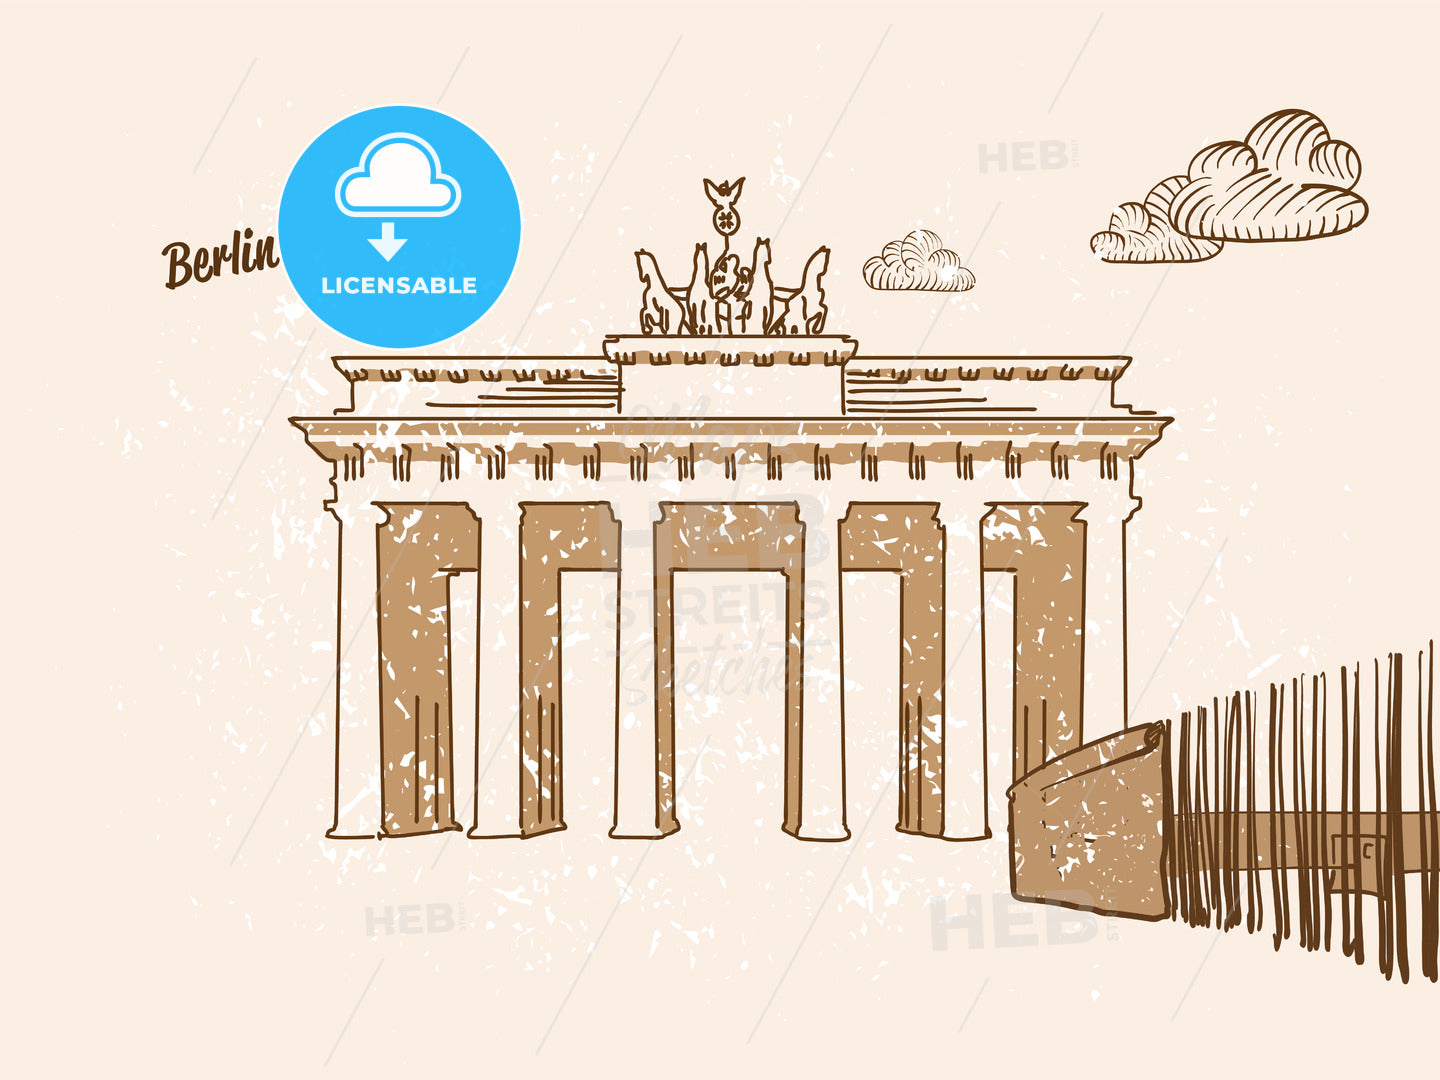 Berlin, Germany, Greeting Card – instant download